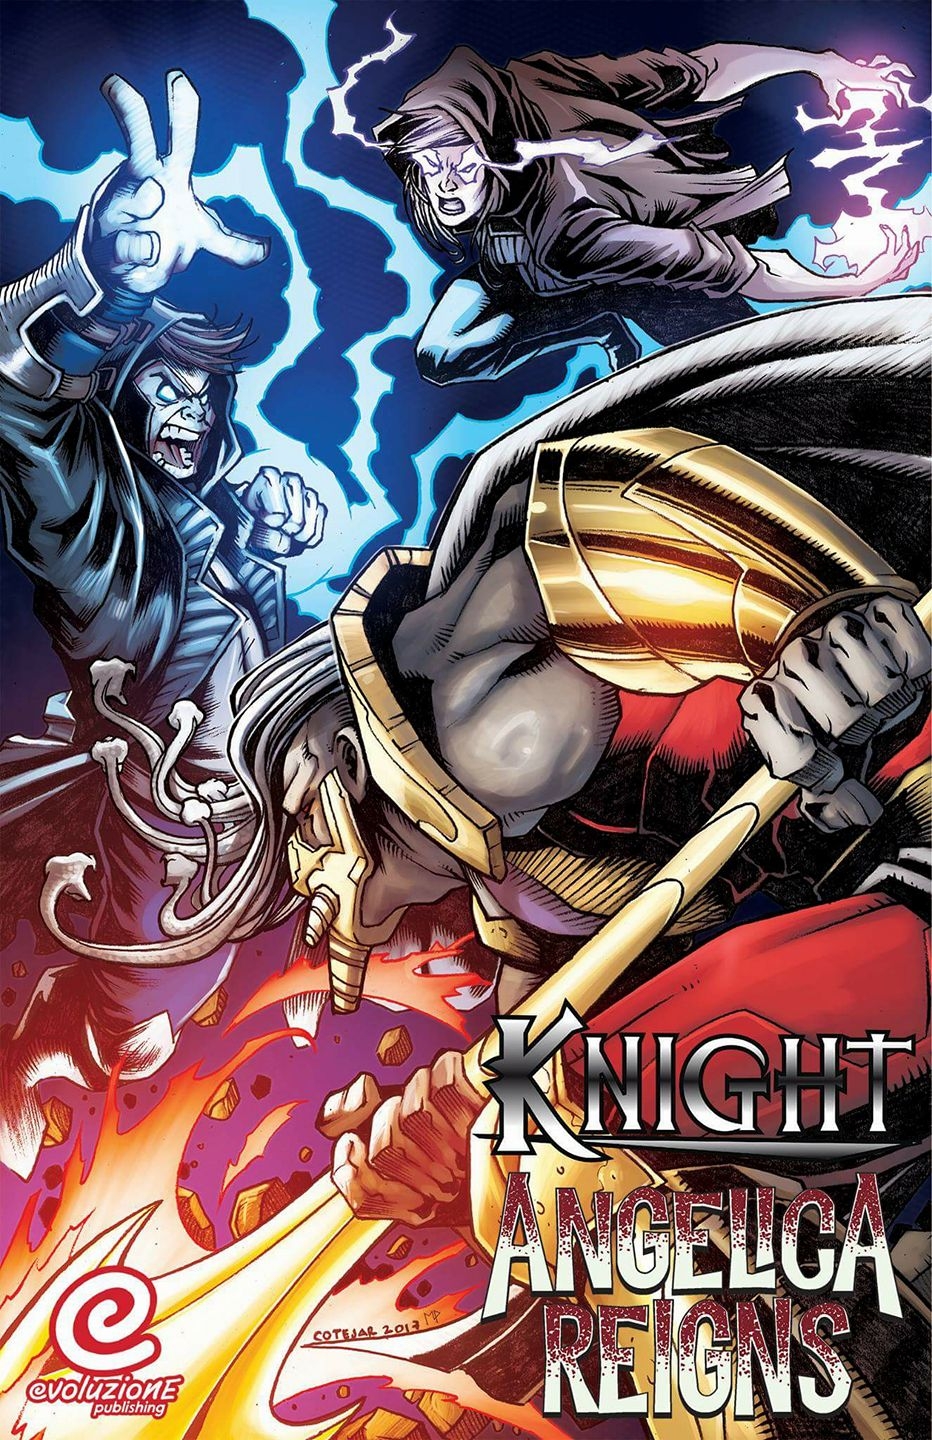 SFC’s Angelica Reigns and  Guido Martinez’s Knight are Teaming up for a KICKSTARTER CROSS OVER